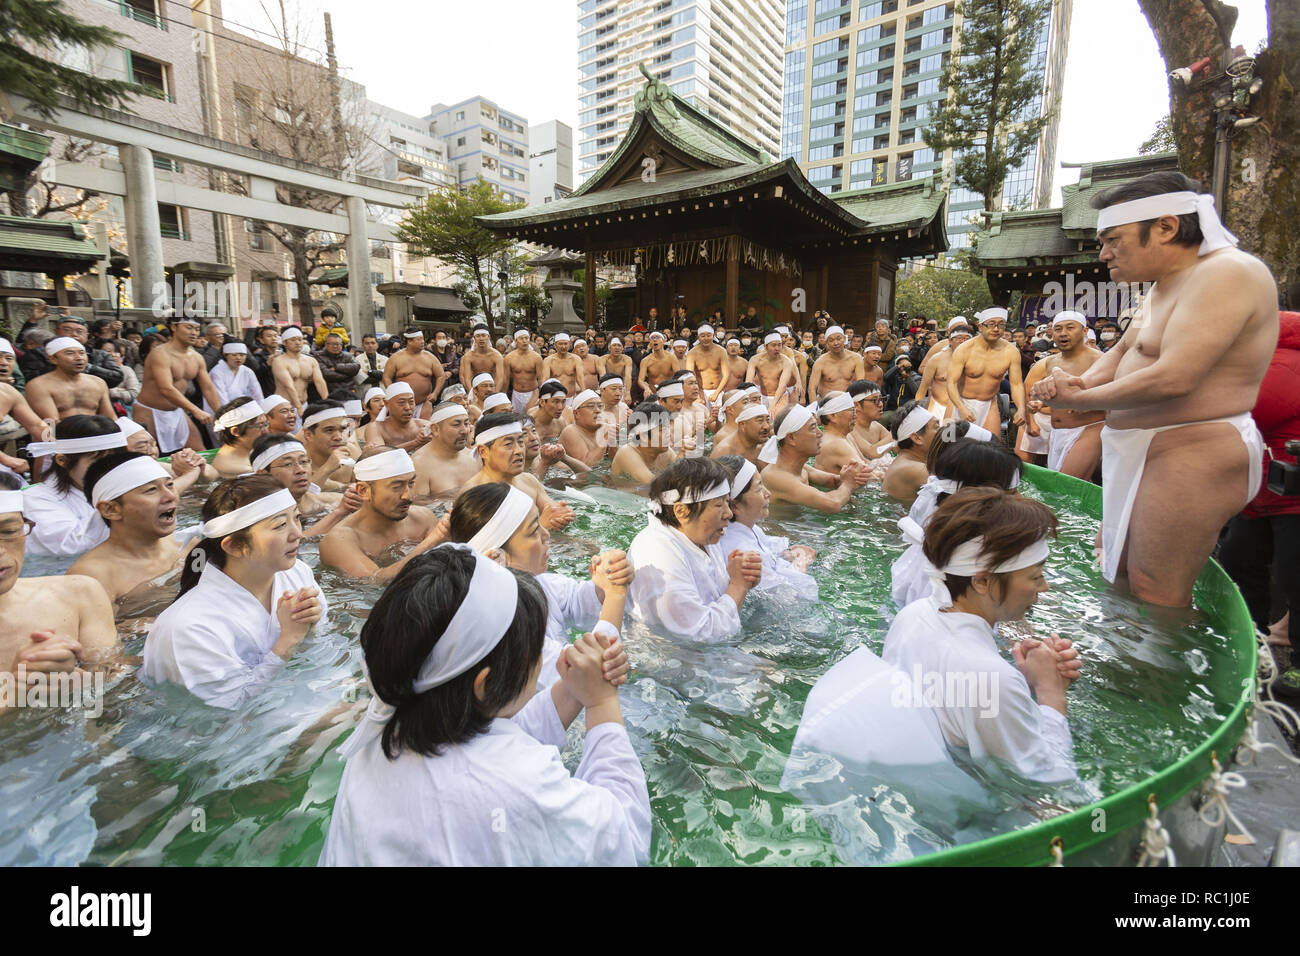 Tokyo, Japan. 13th Jan, 2019. Participants dressed only in loincloths pray in a pool of freezing-cold water containing large blocks of ice during the annual midwinter-ice water bathing (Kanchu-Suiyoku) purification ceremony at Teppozu Inari Shrine. About 91 brave participants (11 women) joined the purification ritual to pray for a healthy new year. Credit: Rodrigo Reyes Marin/ZUMA Wire/Alamy Live News Stock Photo